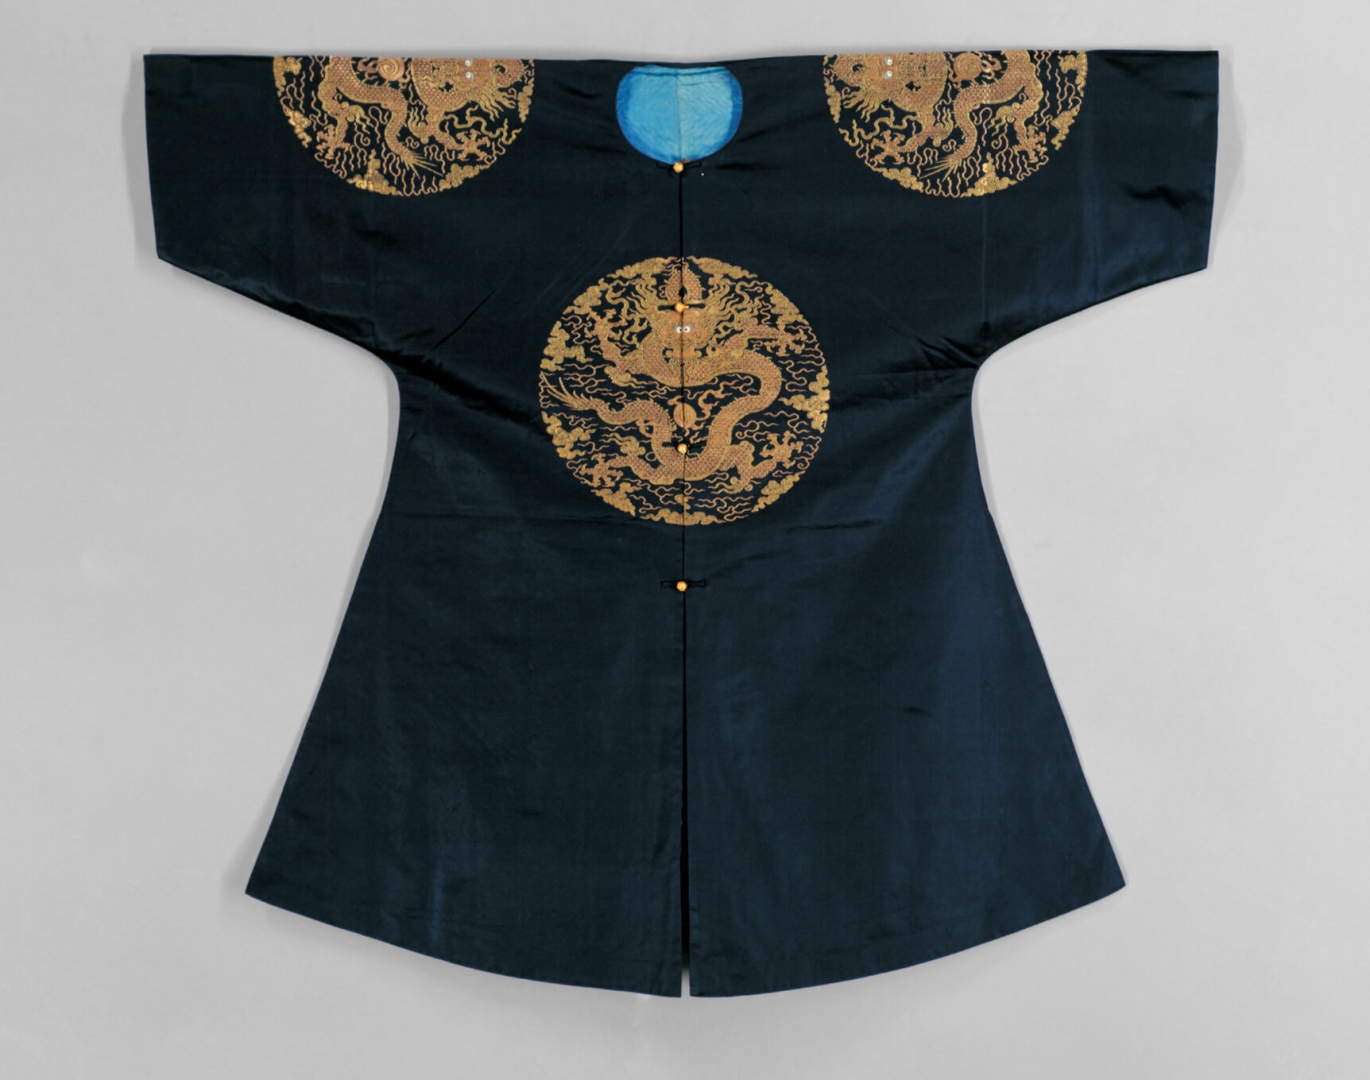 Dark Blue Gold-woven <br />
Satin Lined Surcoat with <br />
Four Dragon Roundels